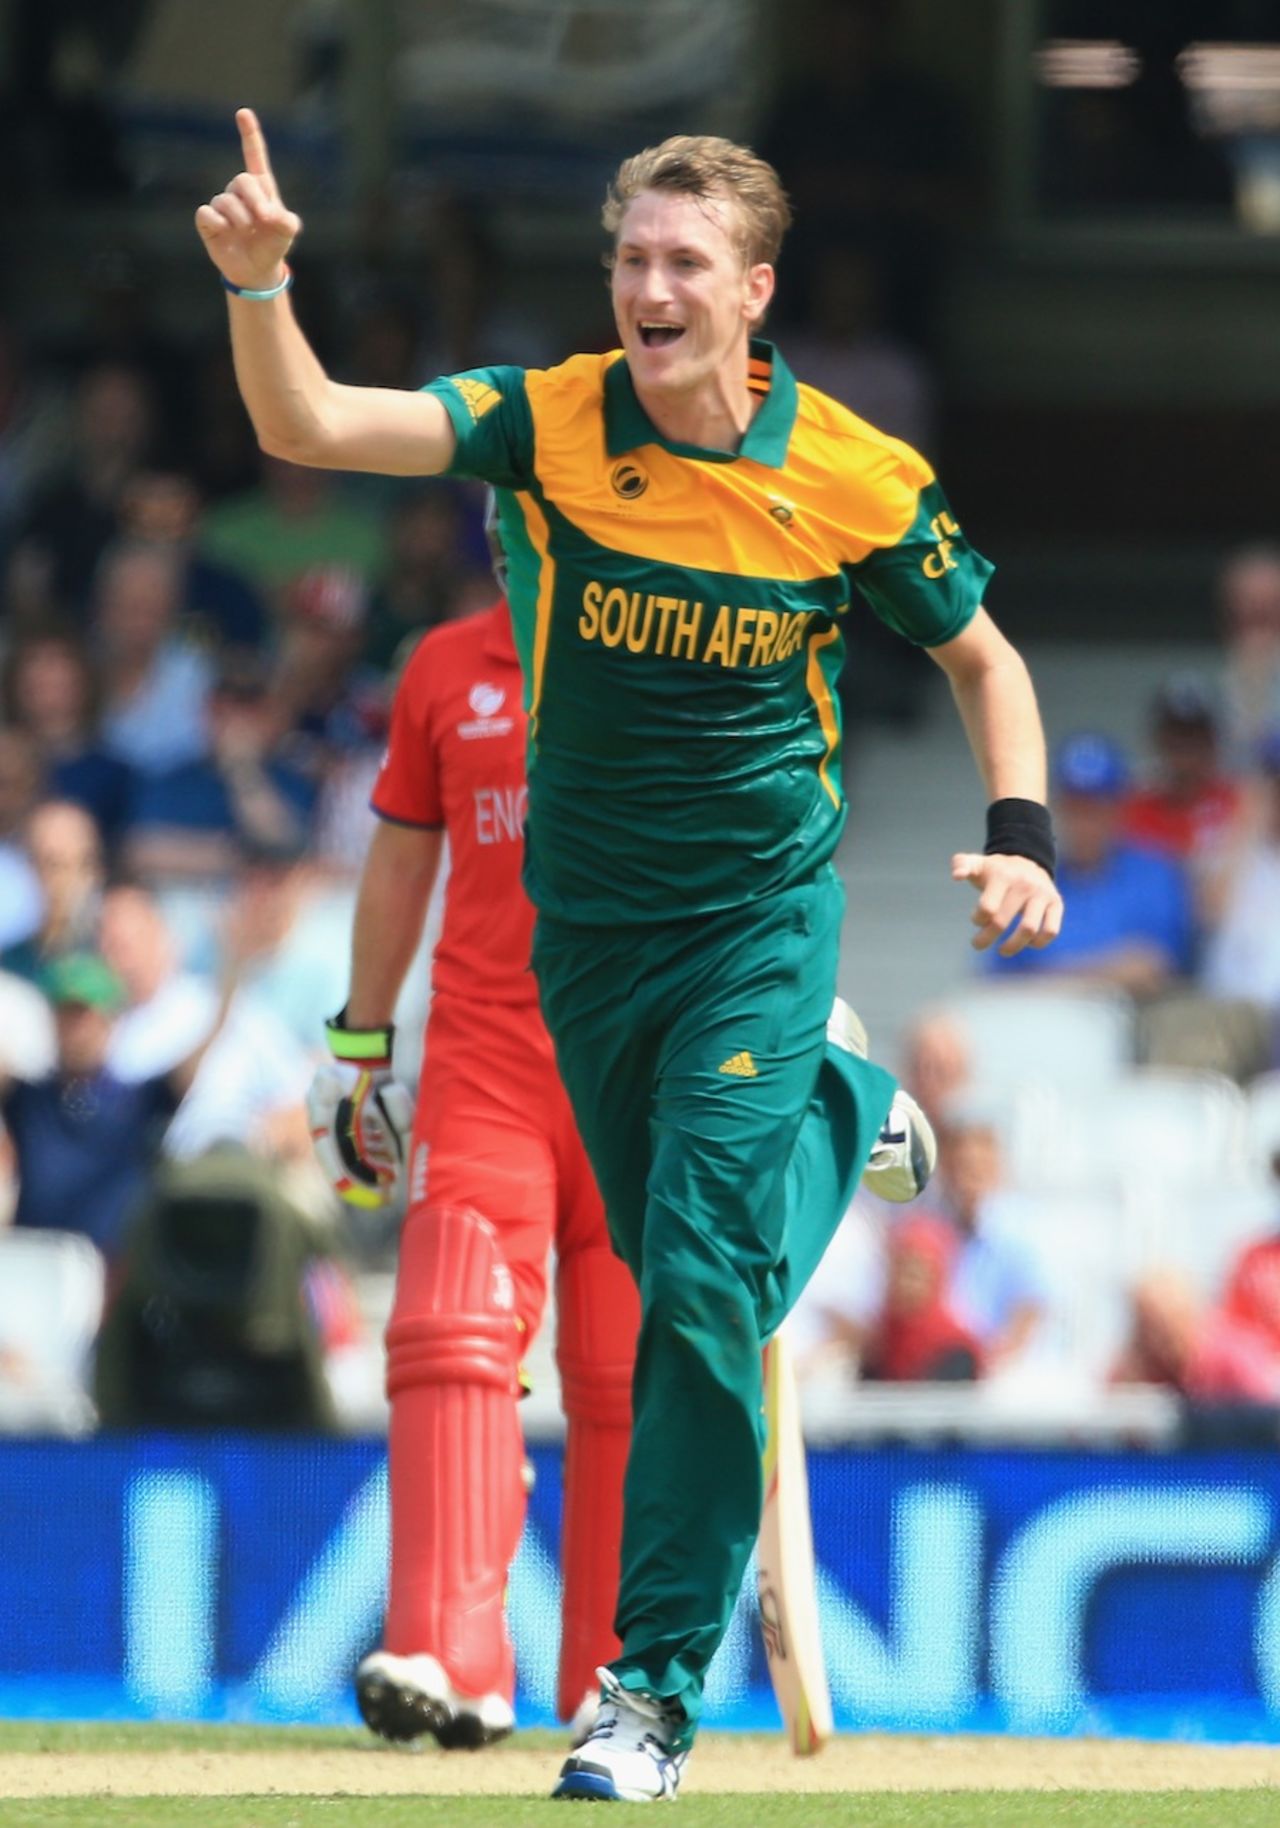 Chris Morris celebrates the wicket of Alastair Cook, England v South Africa, 1st semi-final, Champions Trophy, The Oval, June 19, 2013